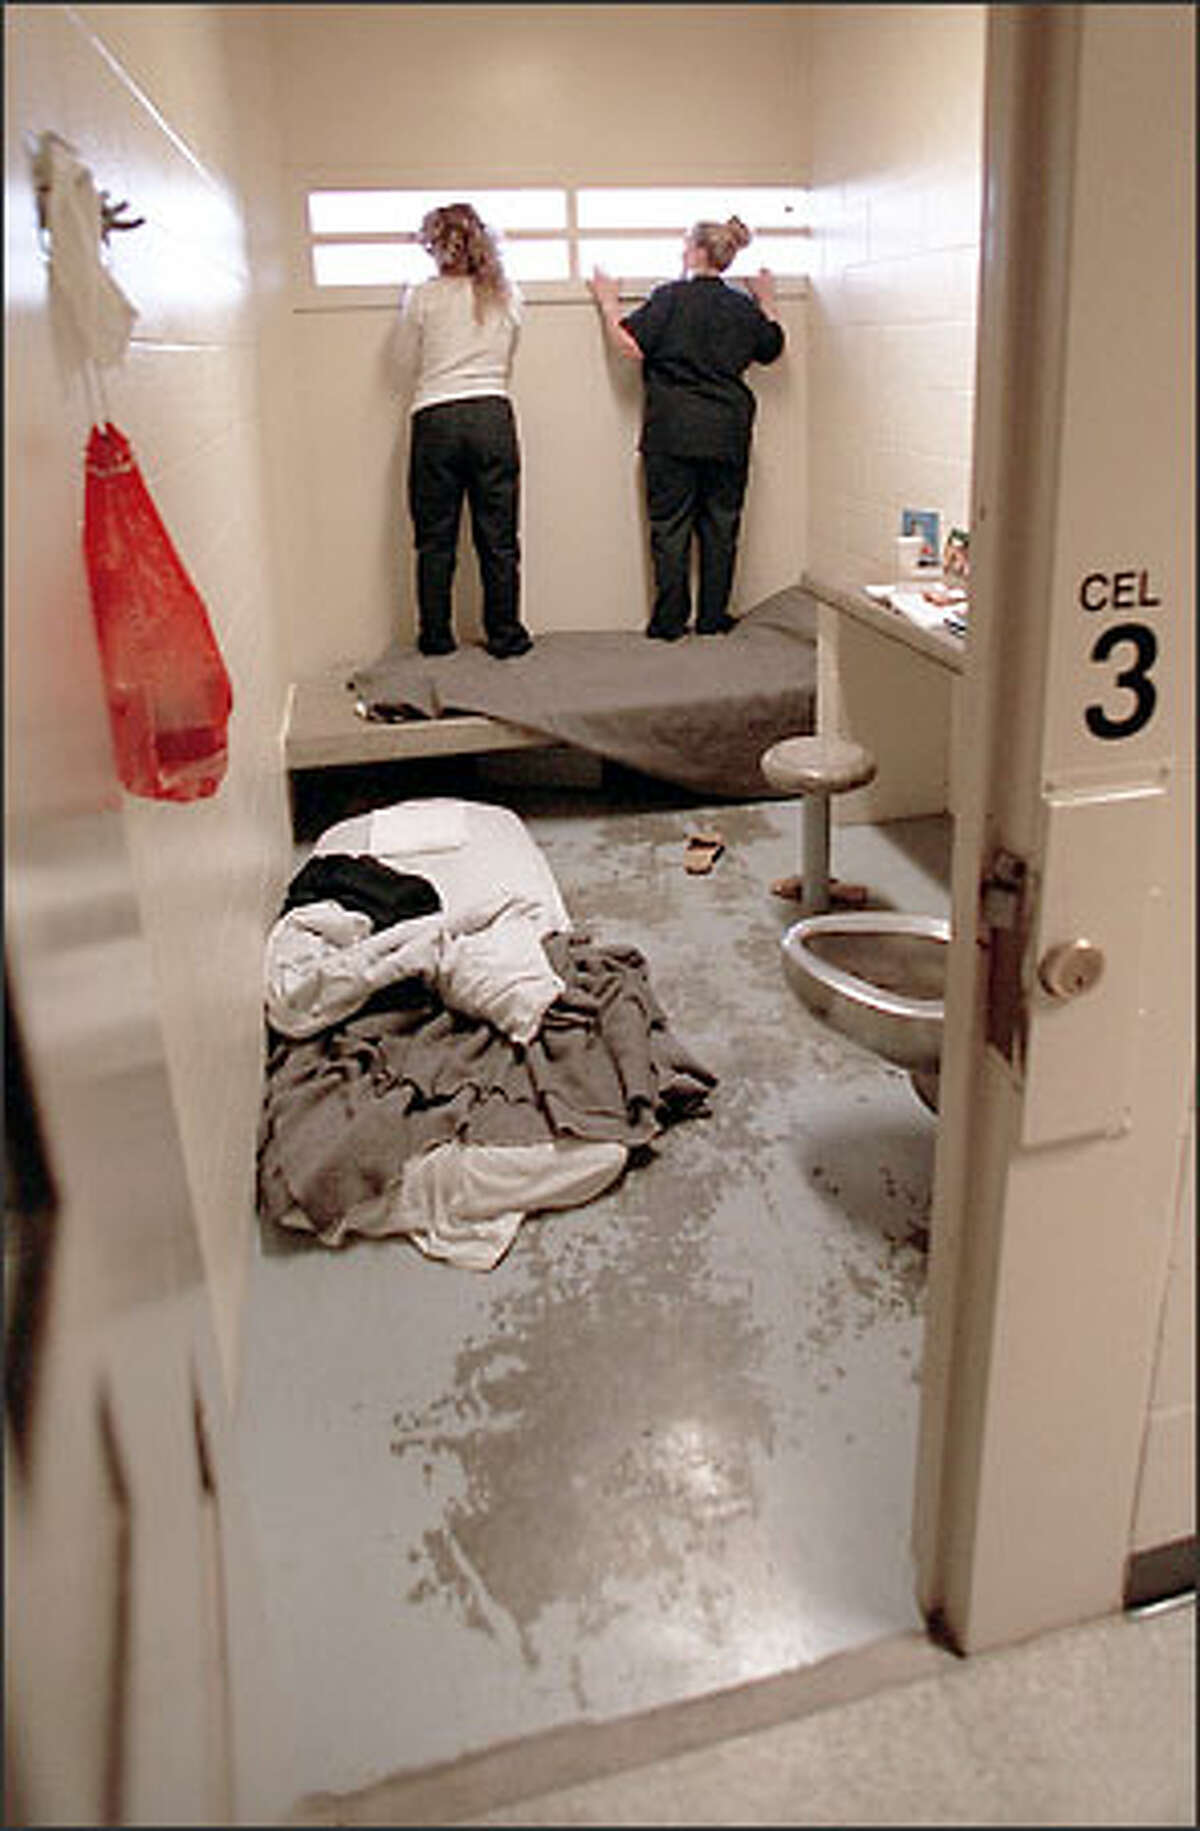 An interior view of a Snohomish County Jail cell, pictured in a file photo.